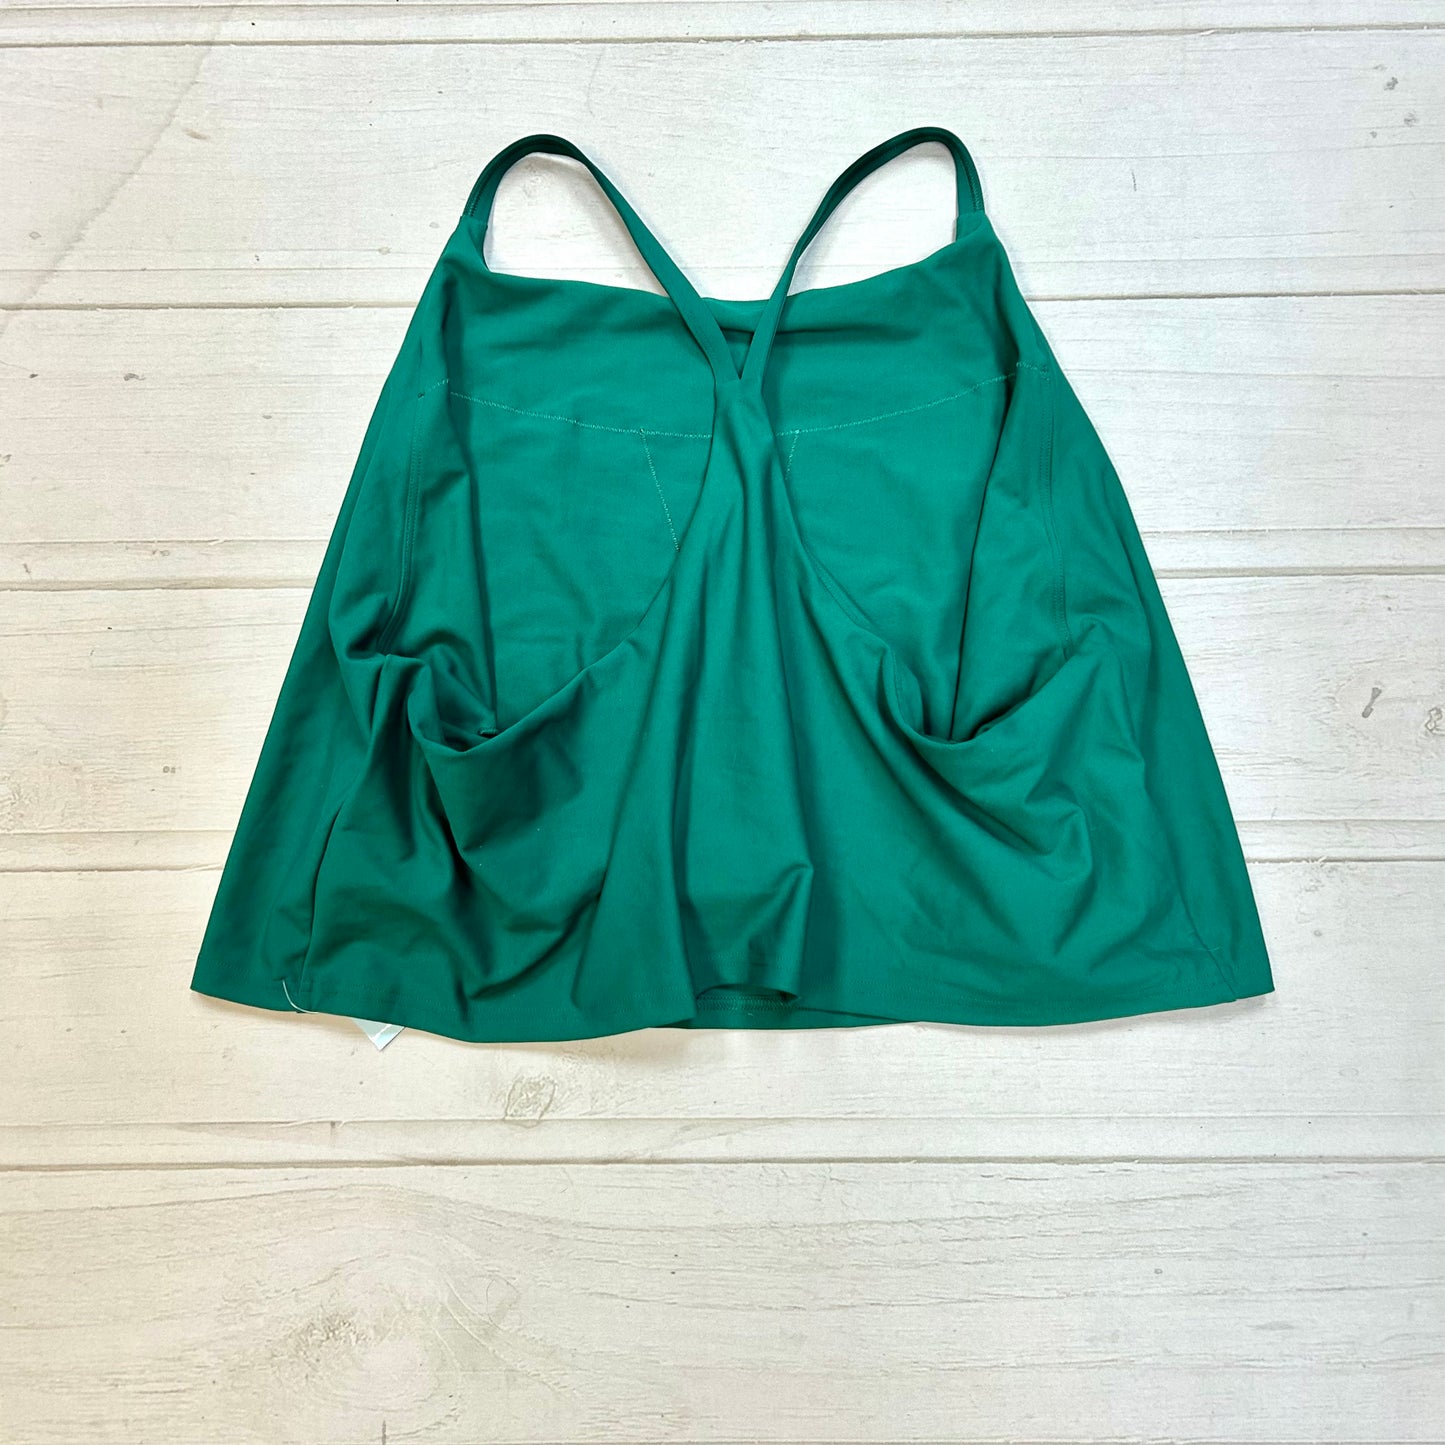 Athletic Bra By Old Navy  Size: 4x